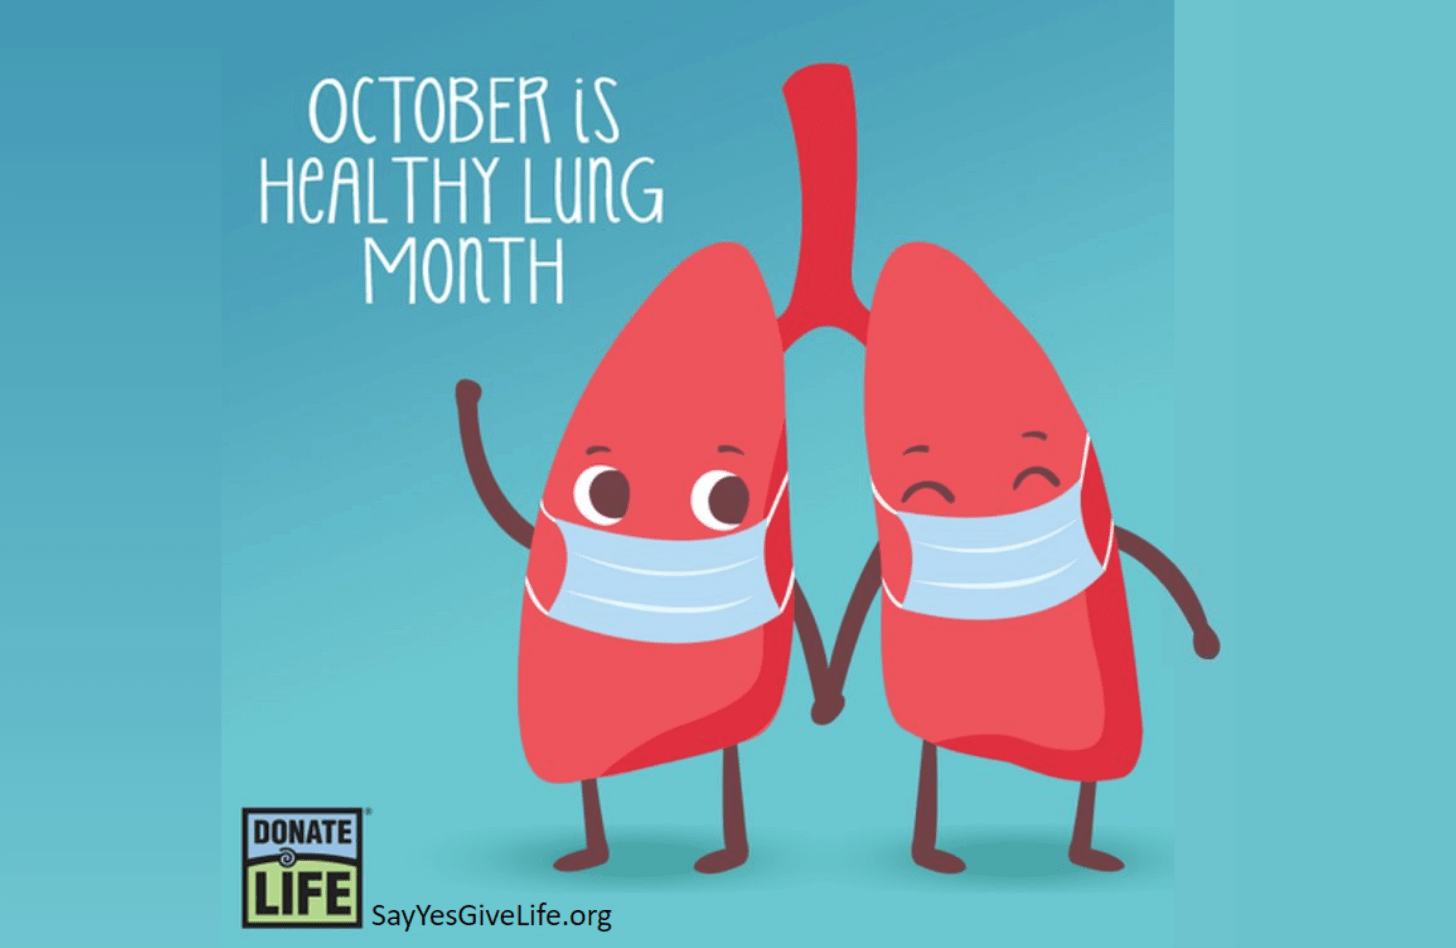 A pair of cartoon lungs holding hands and wearing masks against a teal background.